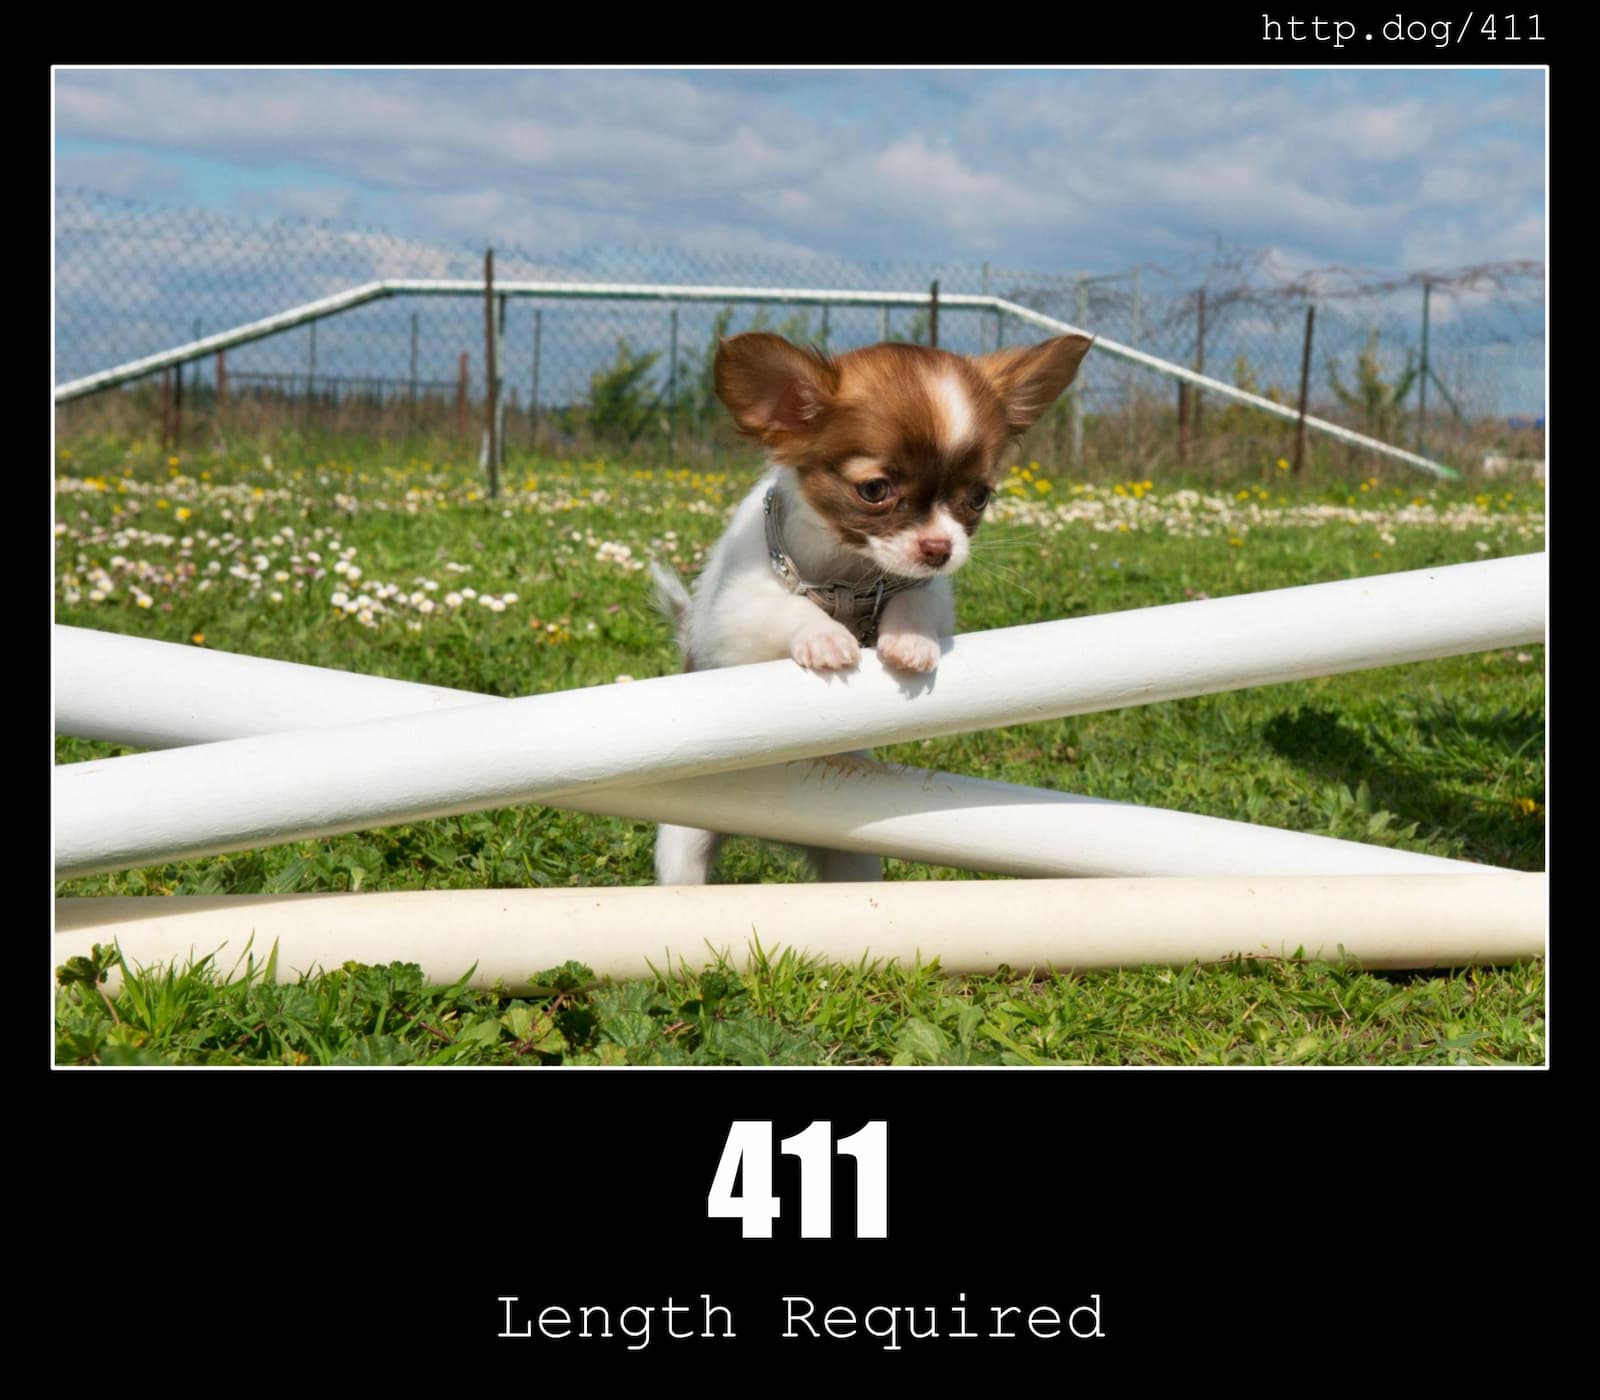 HTTP Status Code 411 Length Required & Dogs